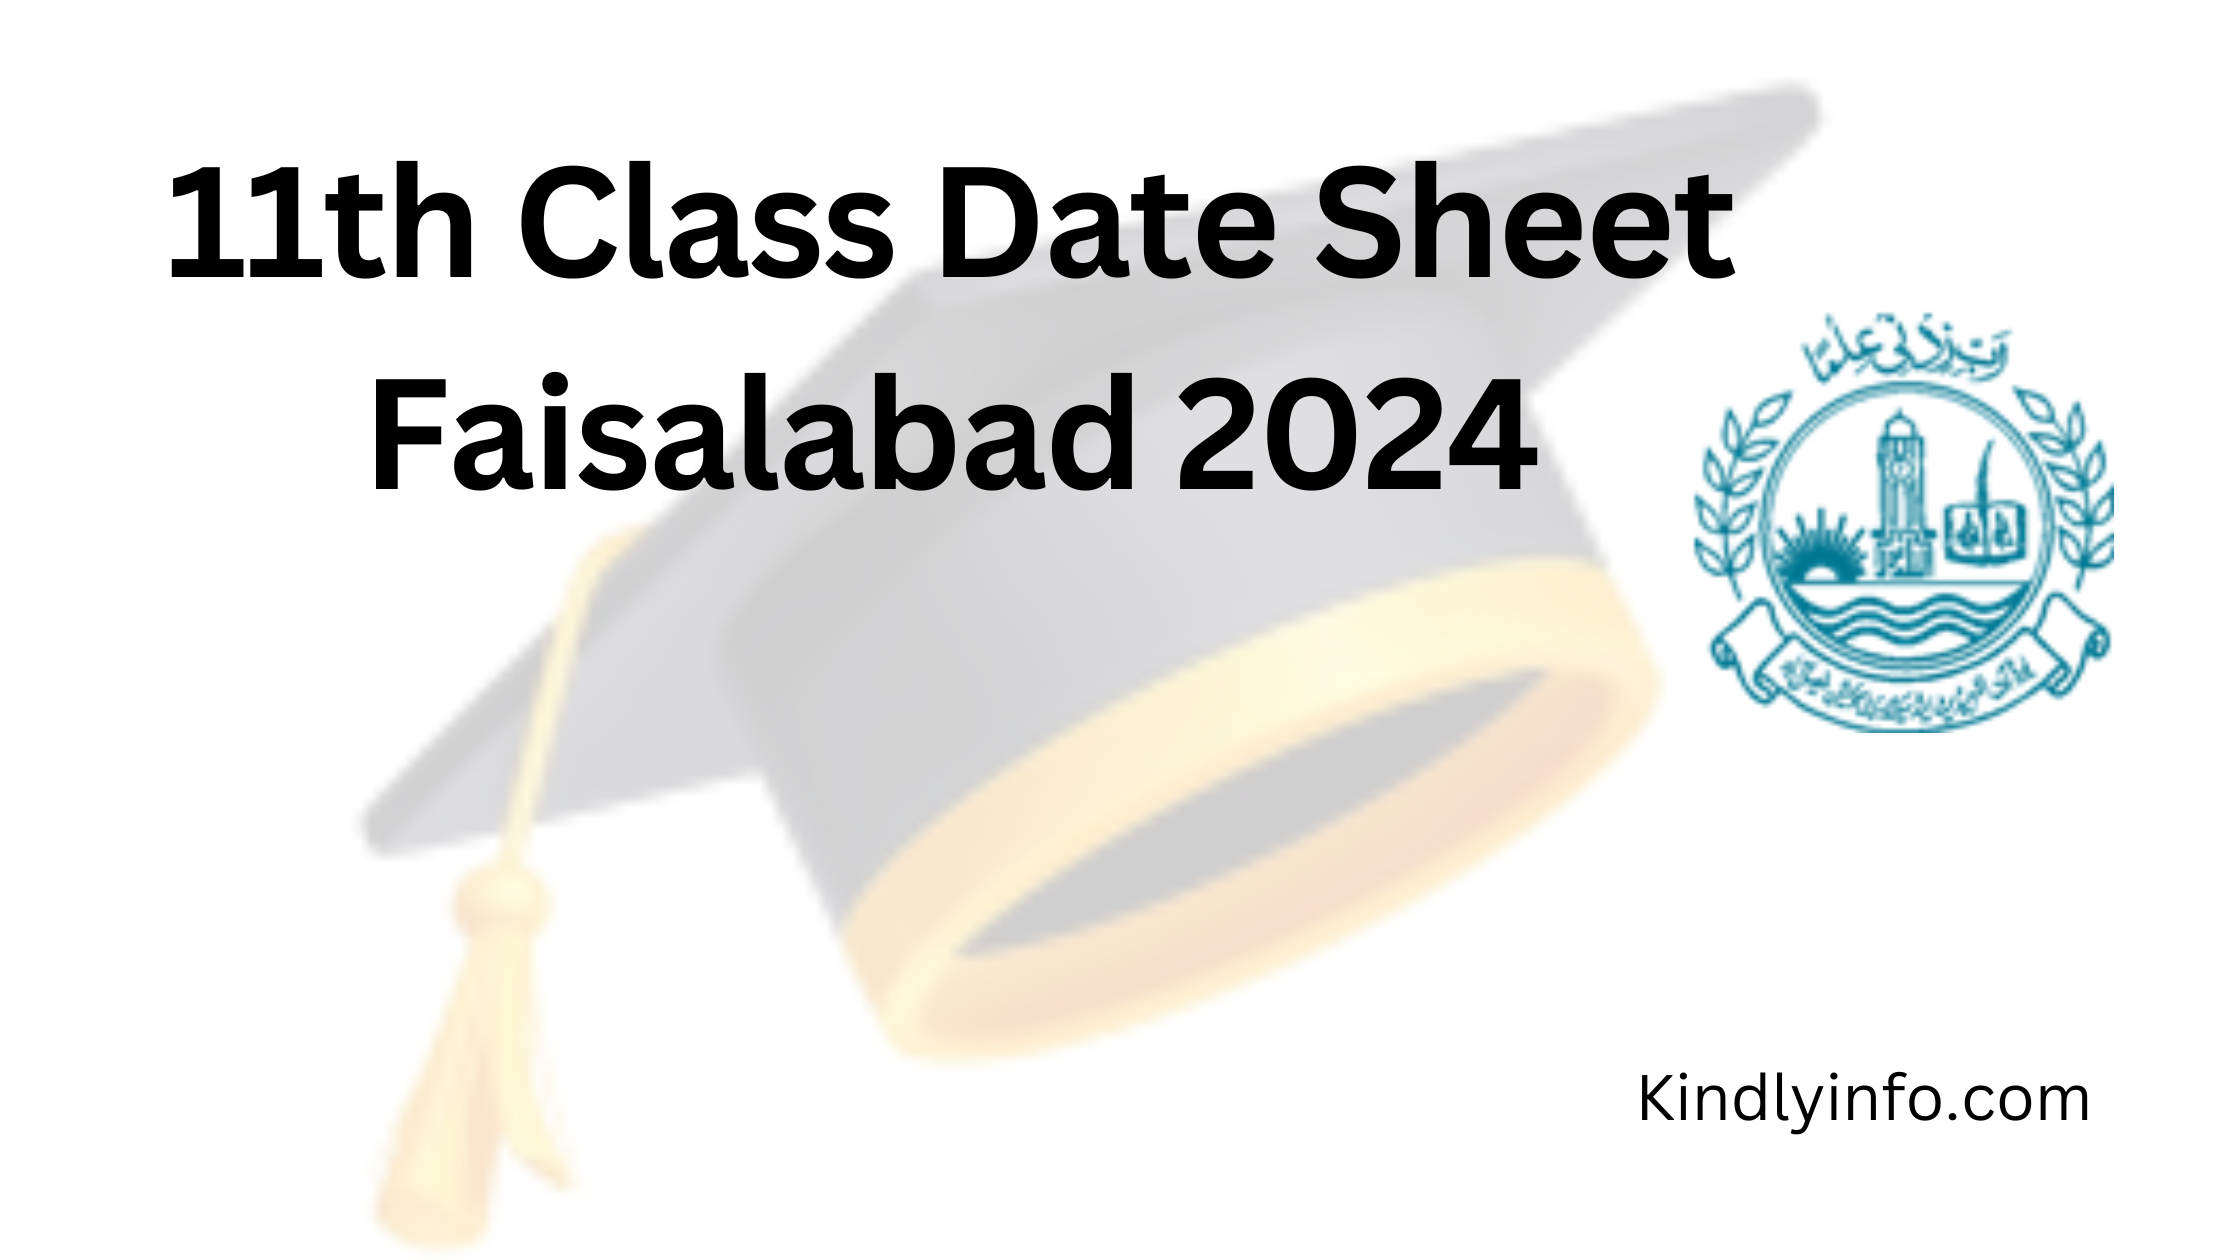 Discover the essential dates for the 11th Class exams under BISE Faisalabad Board 2024. Plan ahead to success with our detailed exam schedule.